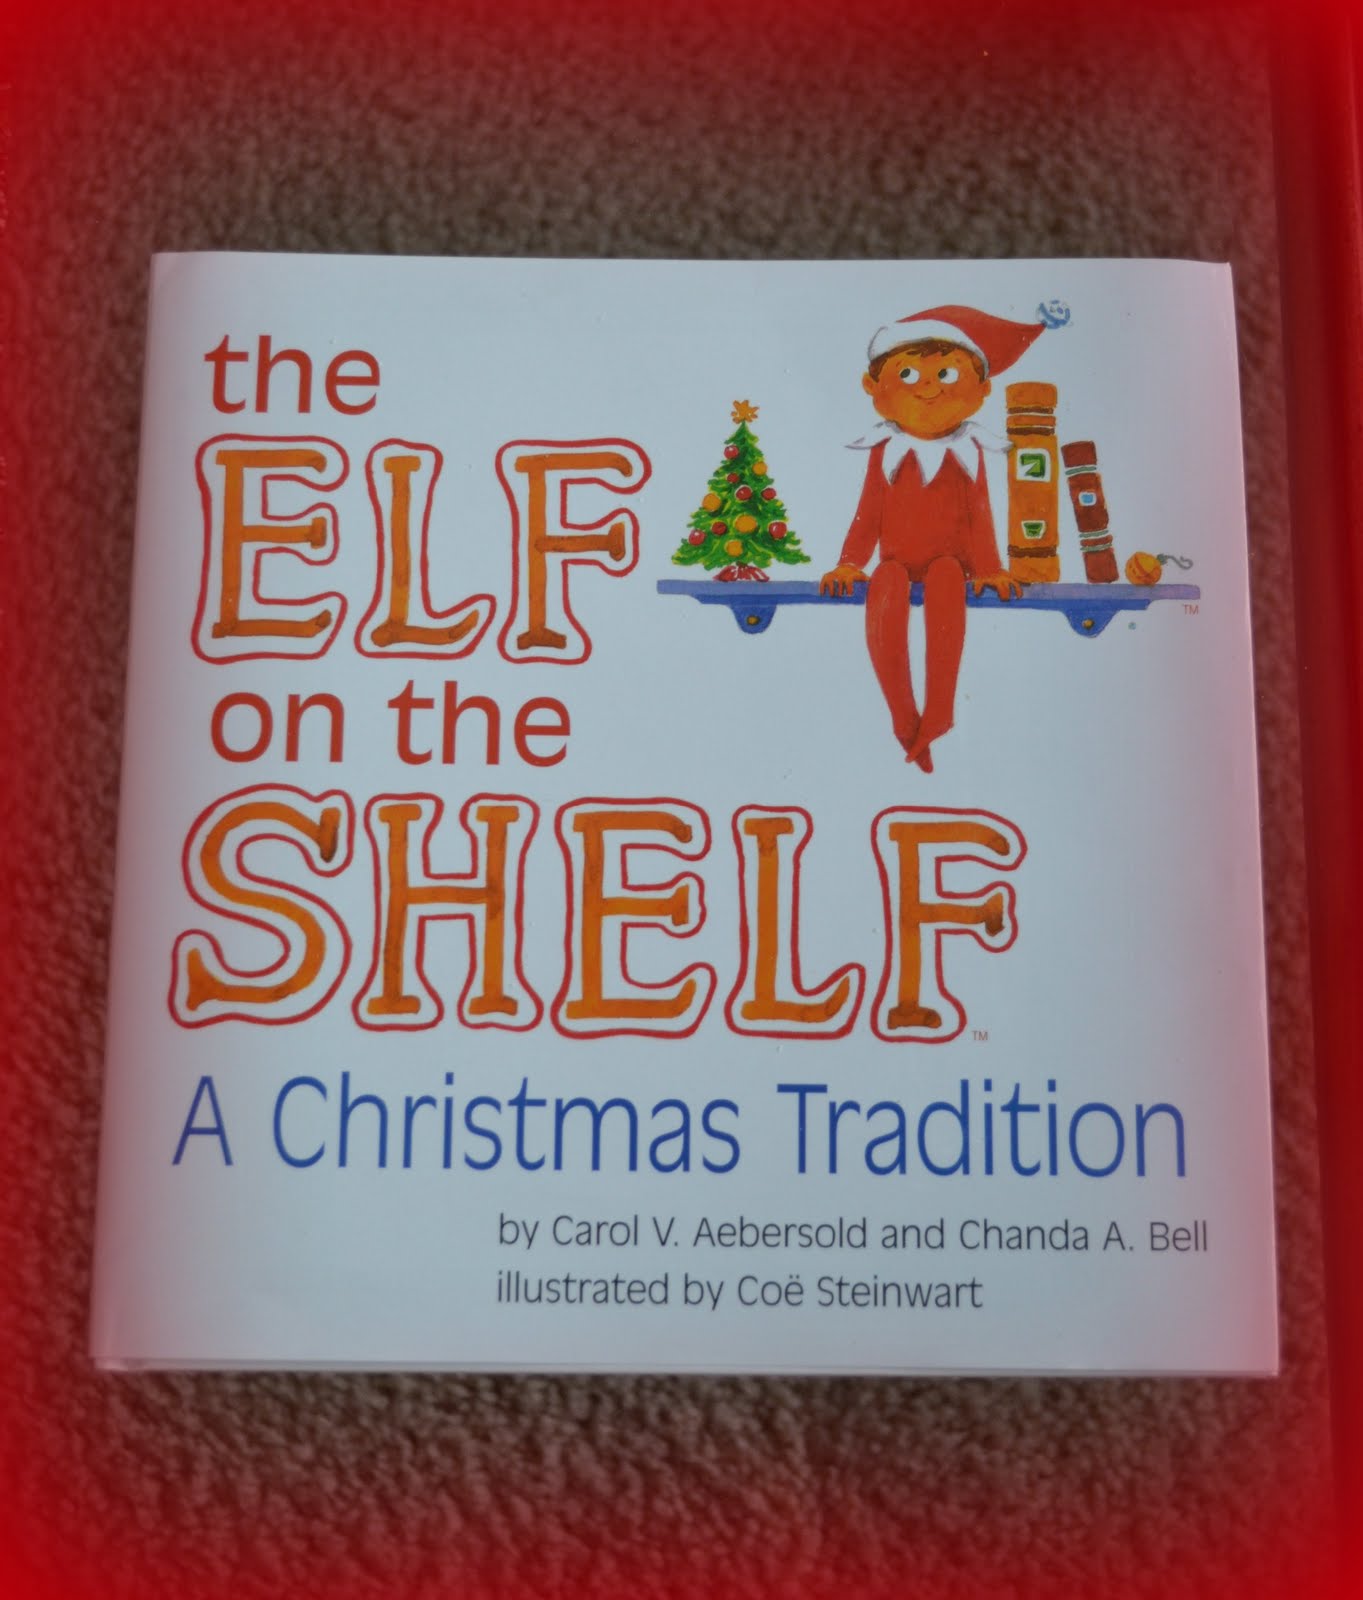 The Patterson Family: The Elf on the Shelf............